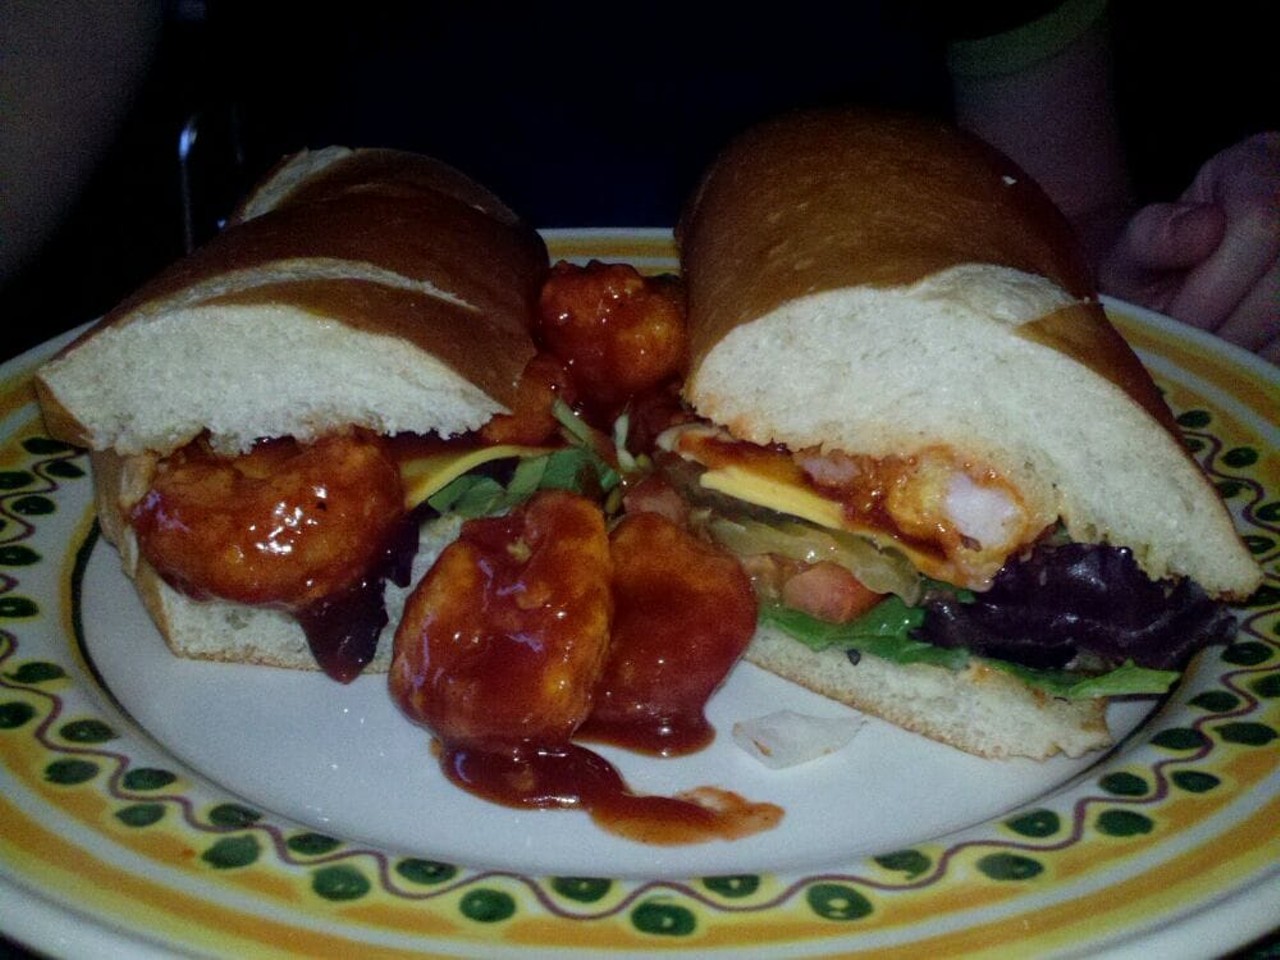  Fried BBQ Shrimp Po&#146;  Boy from Battiste and Dupree Cajun Grill
1992 Warrensville Center Rd., Cleveland
(It also comes with American cheese, which we kindly ask the boss to omit).
Photo via Battiste and Dupree/Yelp